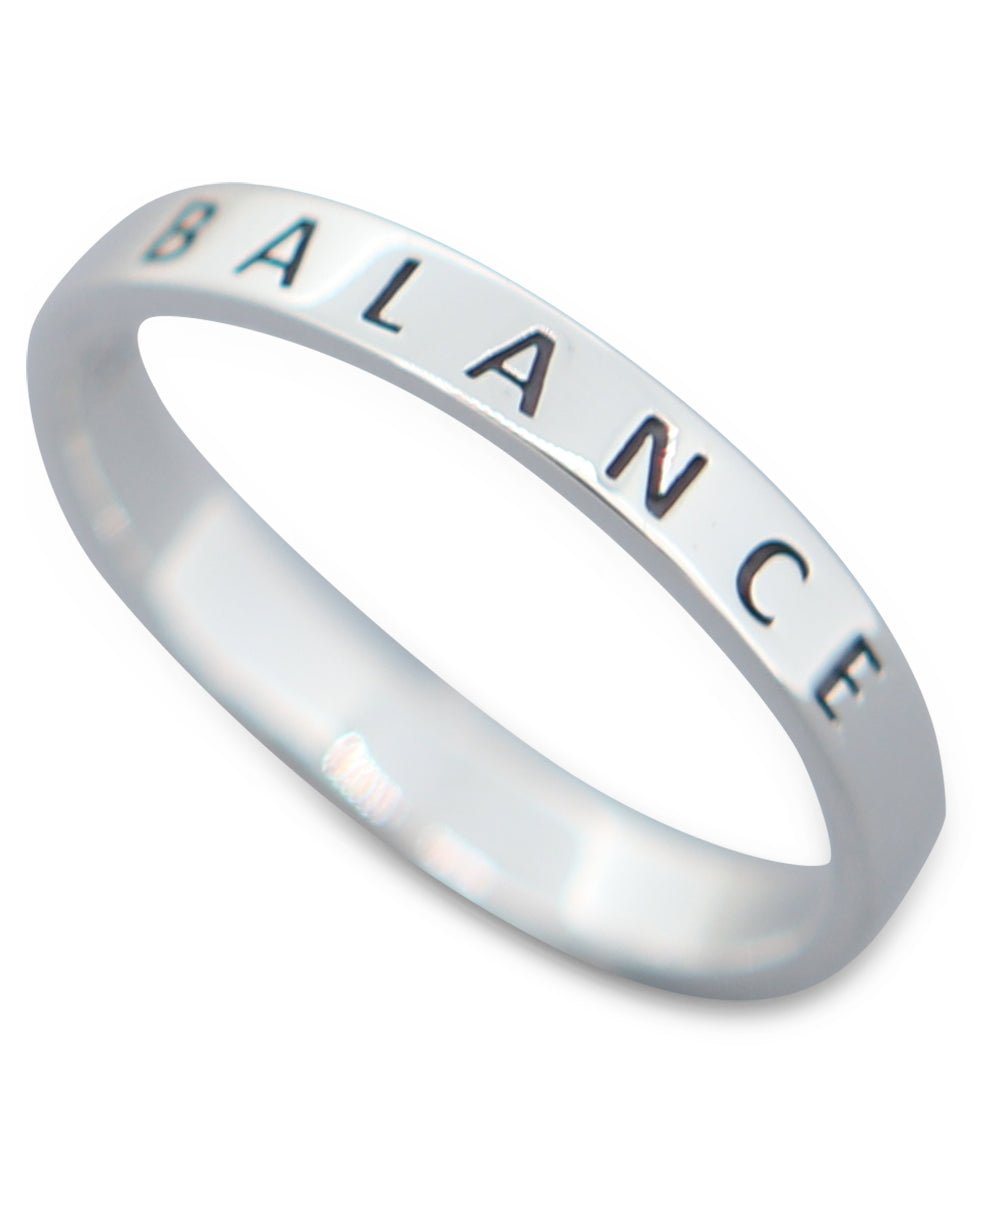 Minimalist Sterling Silver Balance Ring For Men and Women - Rings Size 6